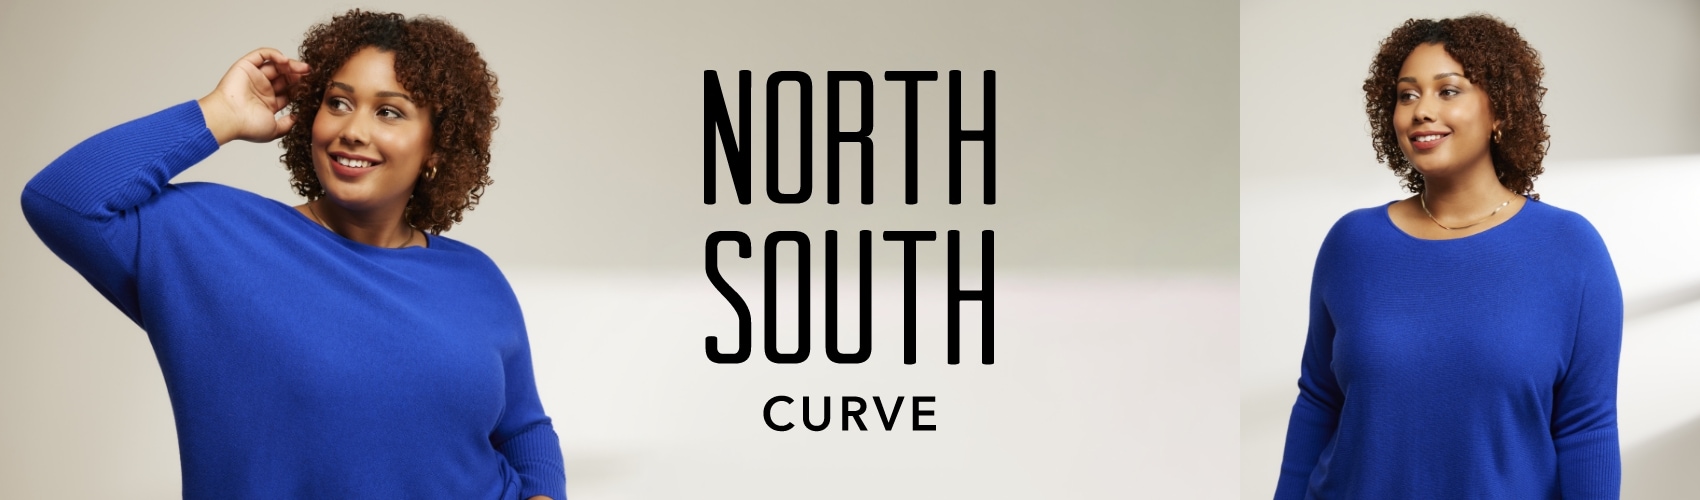 North South Curve